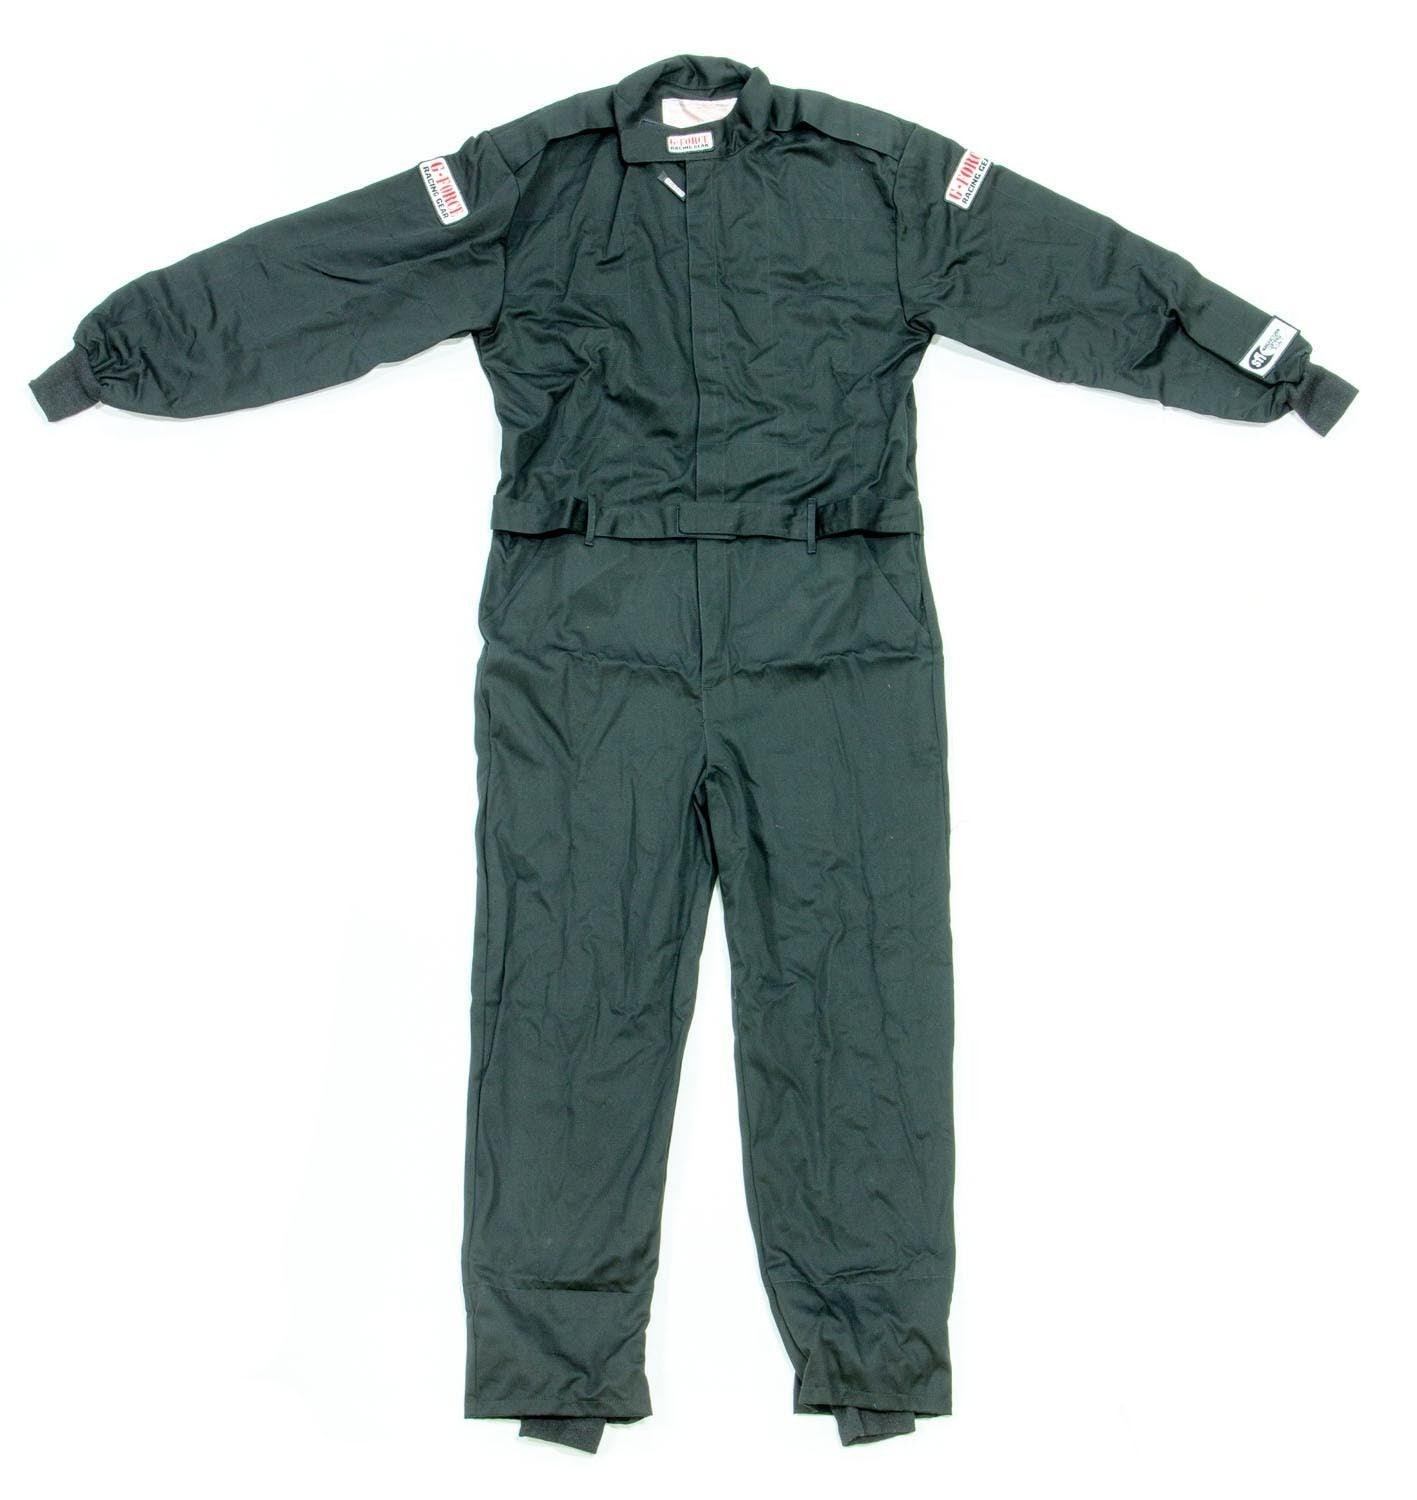 GF125 One-Piece Suit Small Black - Burlile Performance Products